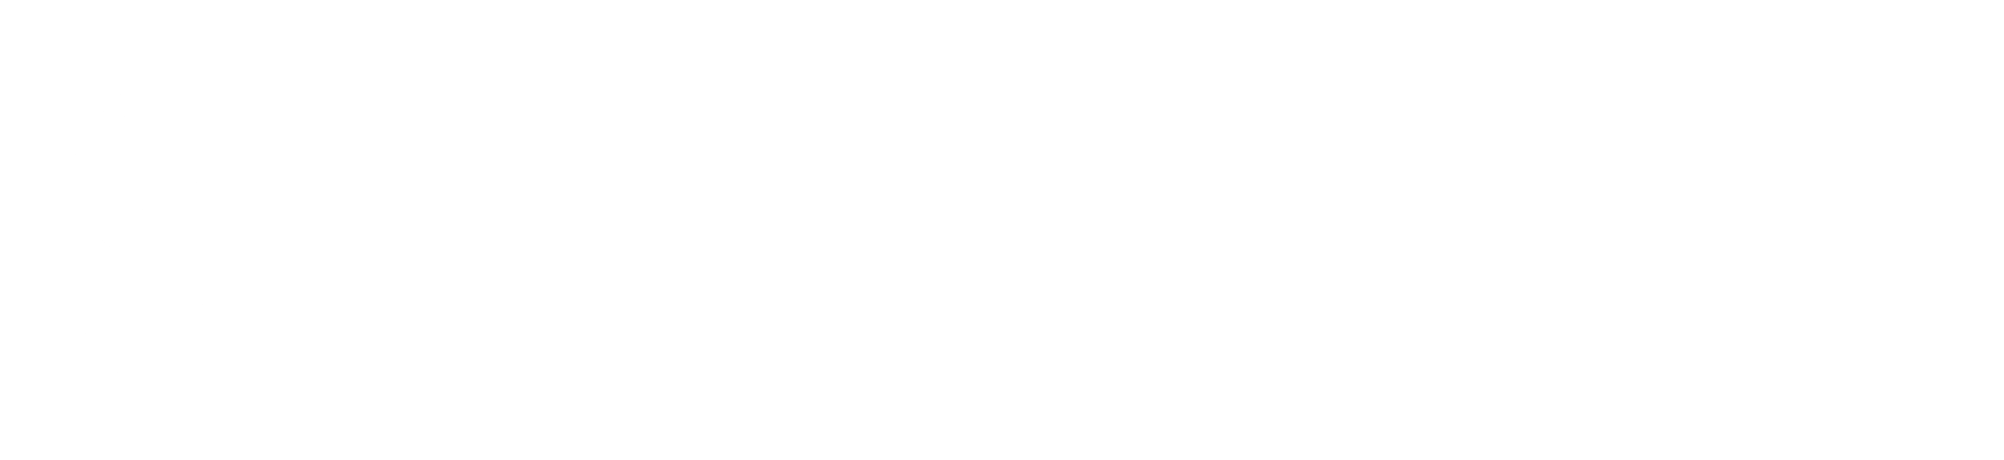 Brownfield Funeral Home Logo